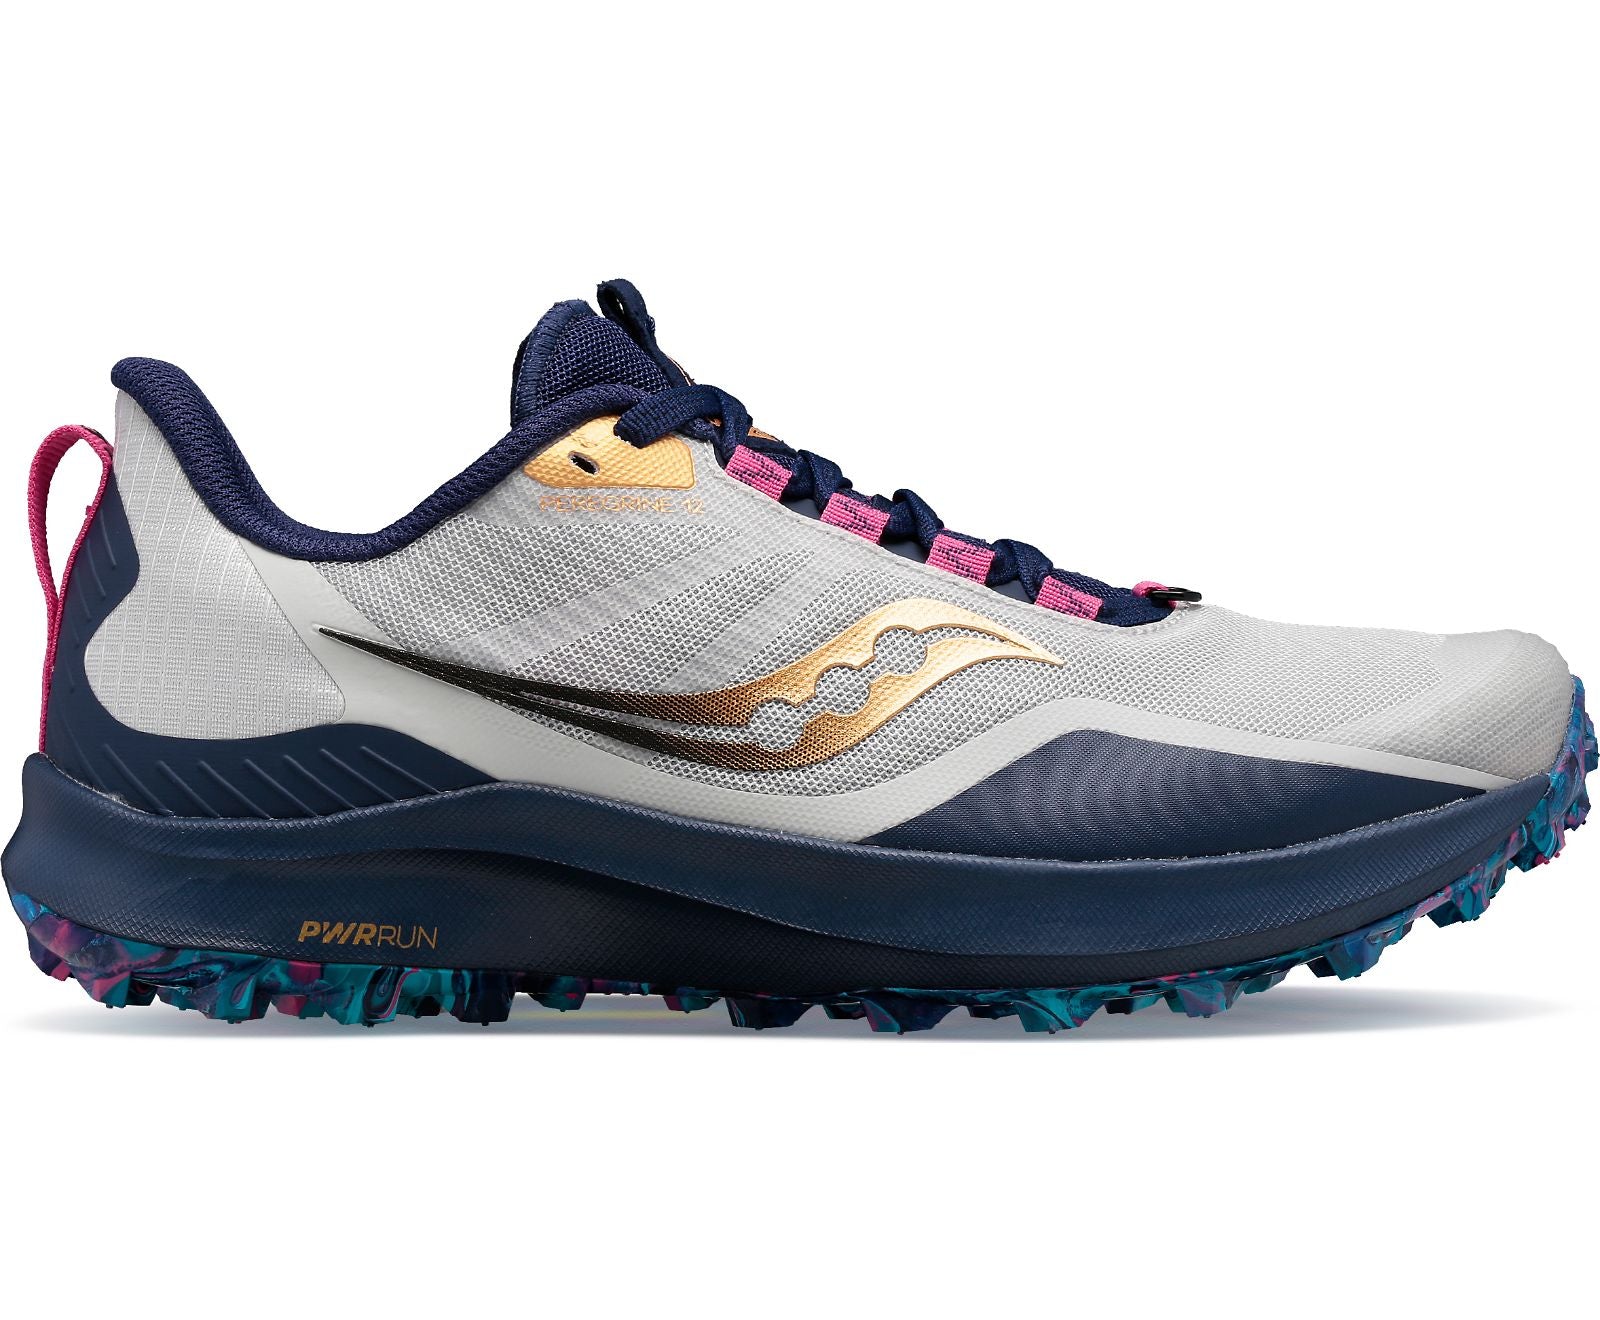 Named for the fastest bird on earth, the Women's Peregrine 12 from Saucony more than lives up to its name. Stripped down for blistering speeds, it’s time to get comfortable free-flying across the trails.